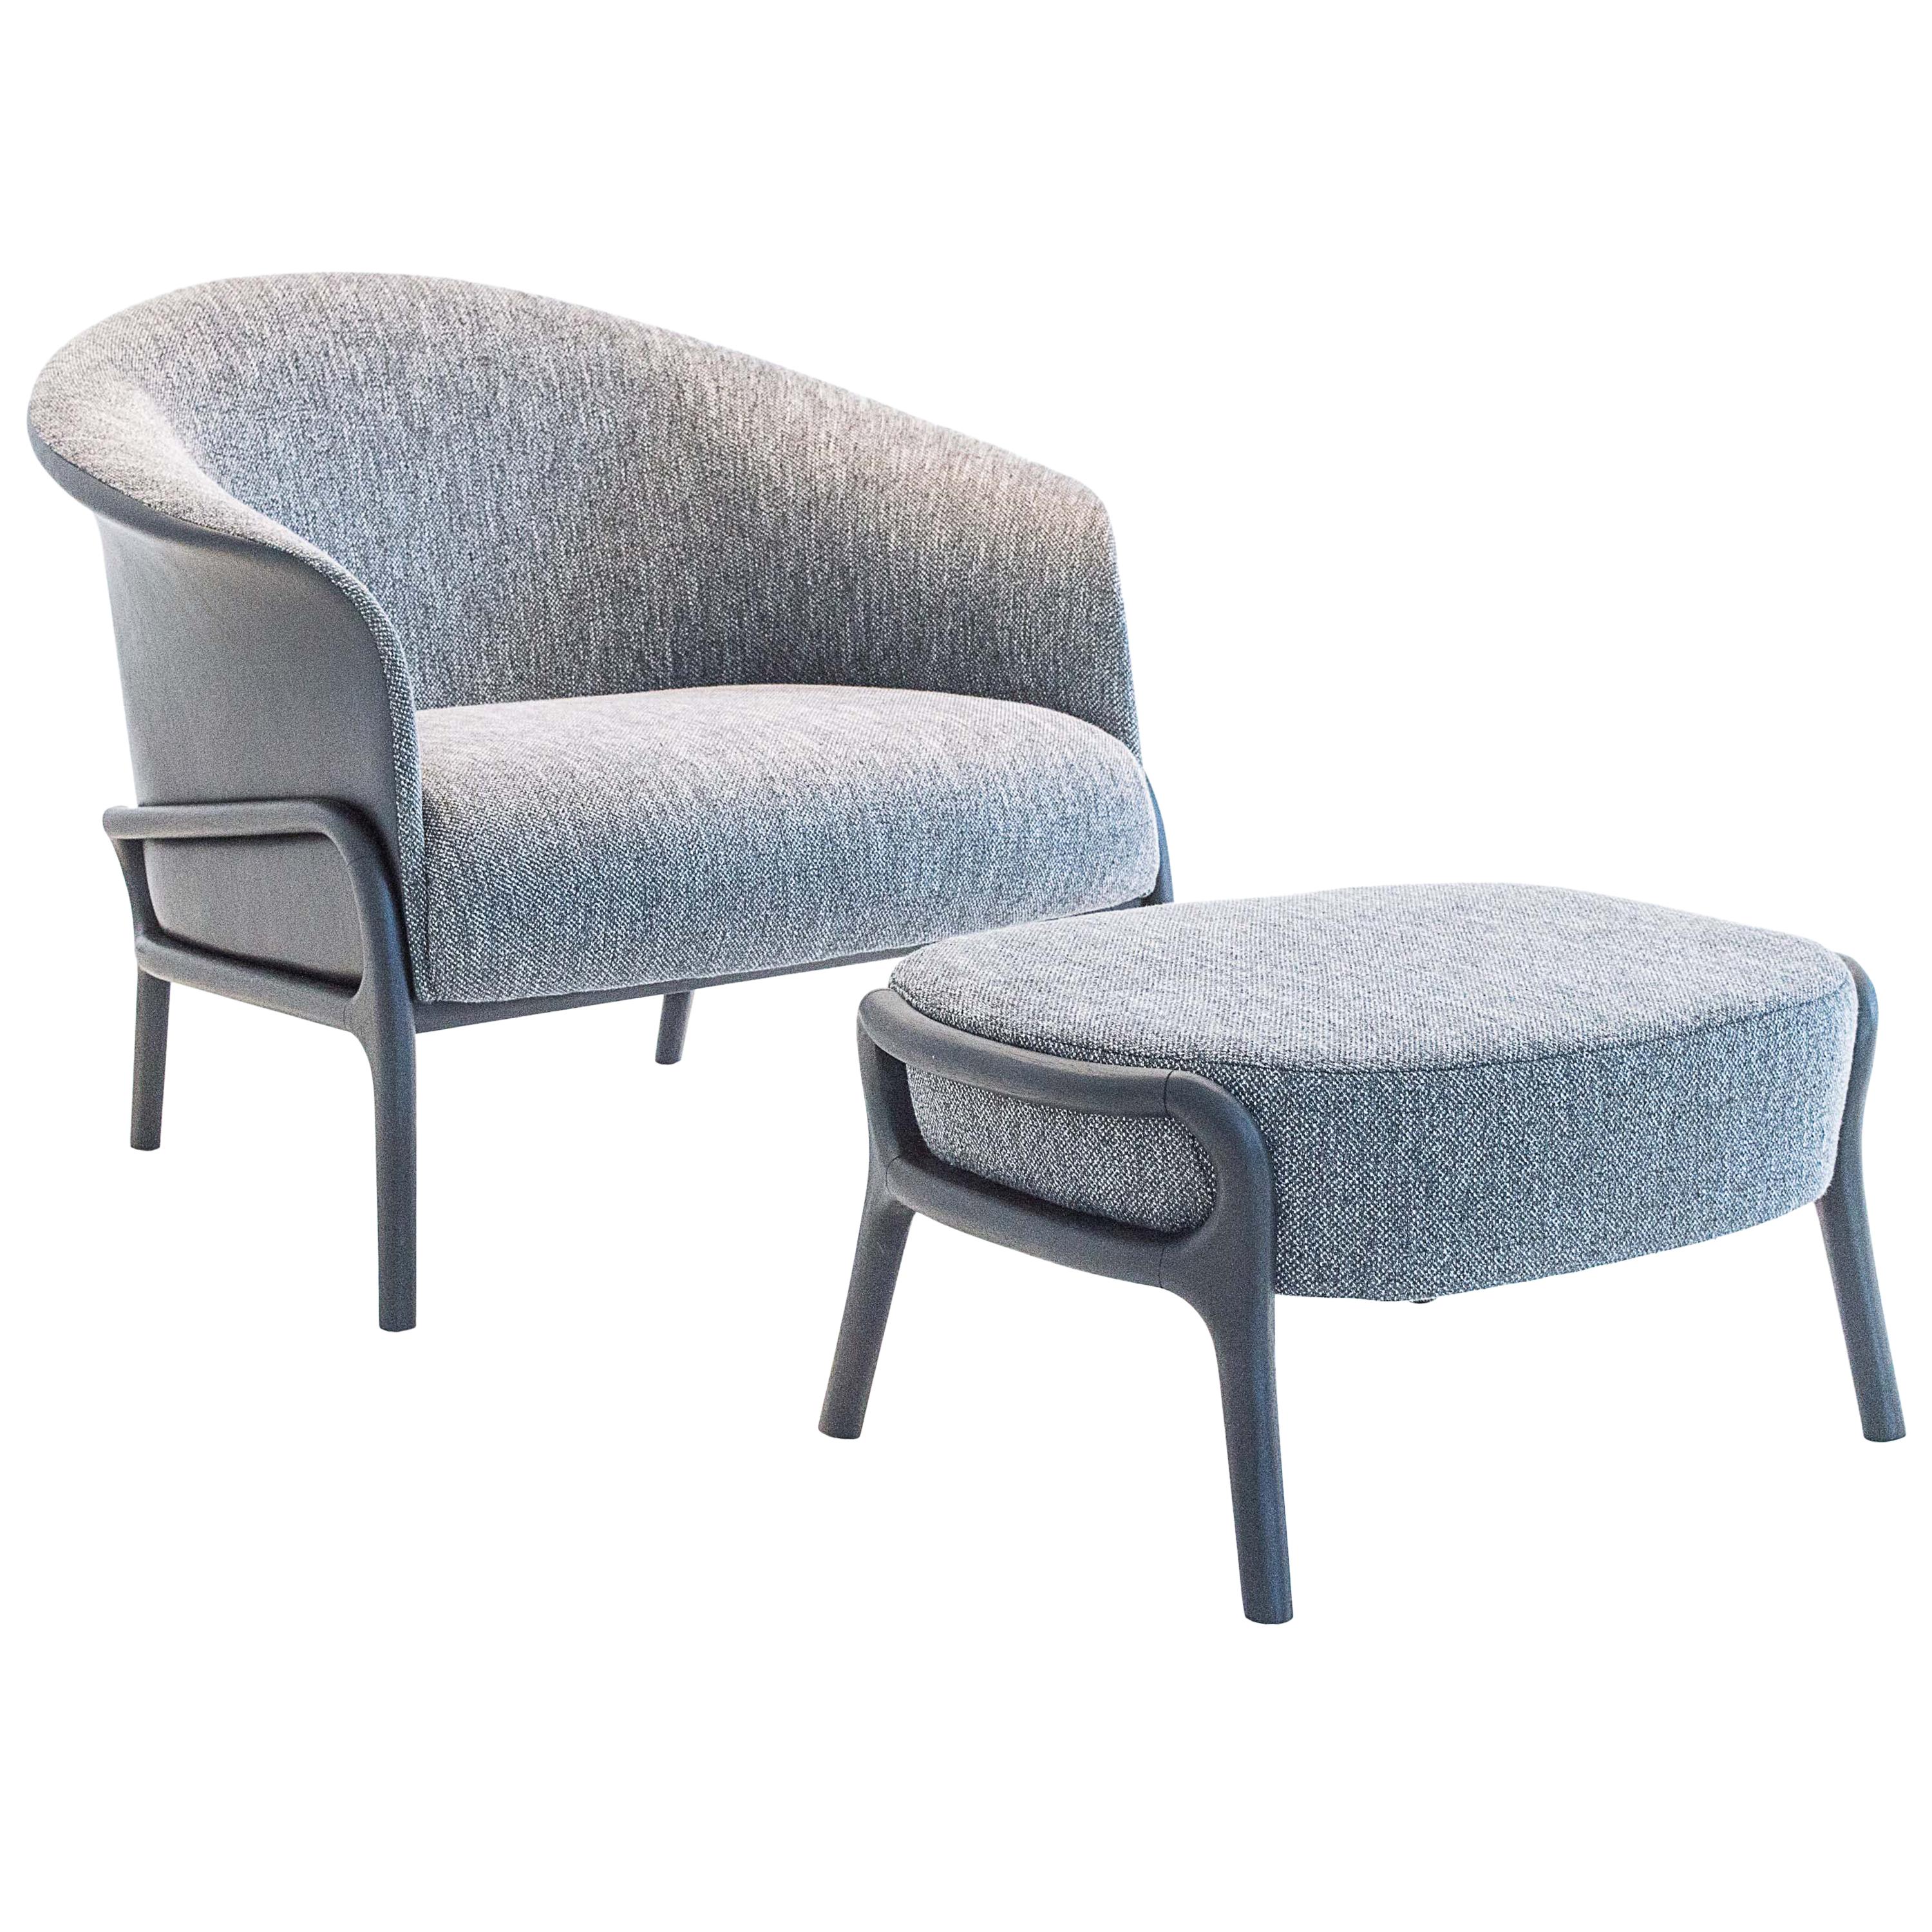 Modern Organic Style Armchair and Foot Stool in Solid Wood, Upholstered Seating